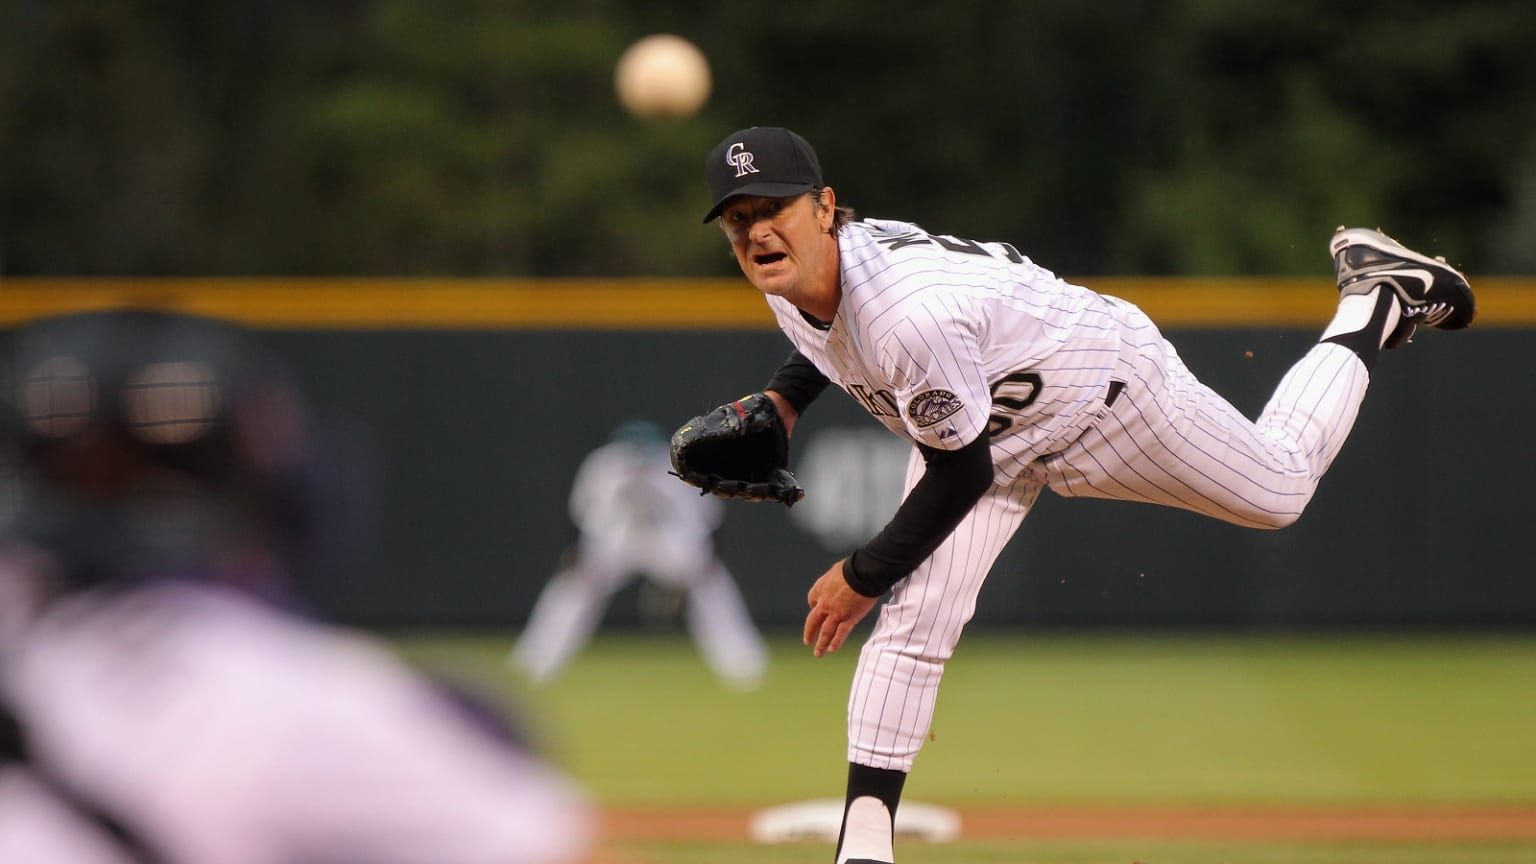 Jamie Moyer follows through on a pitch for the Rockies